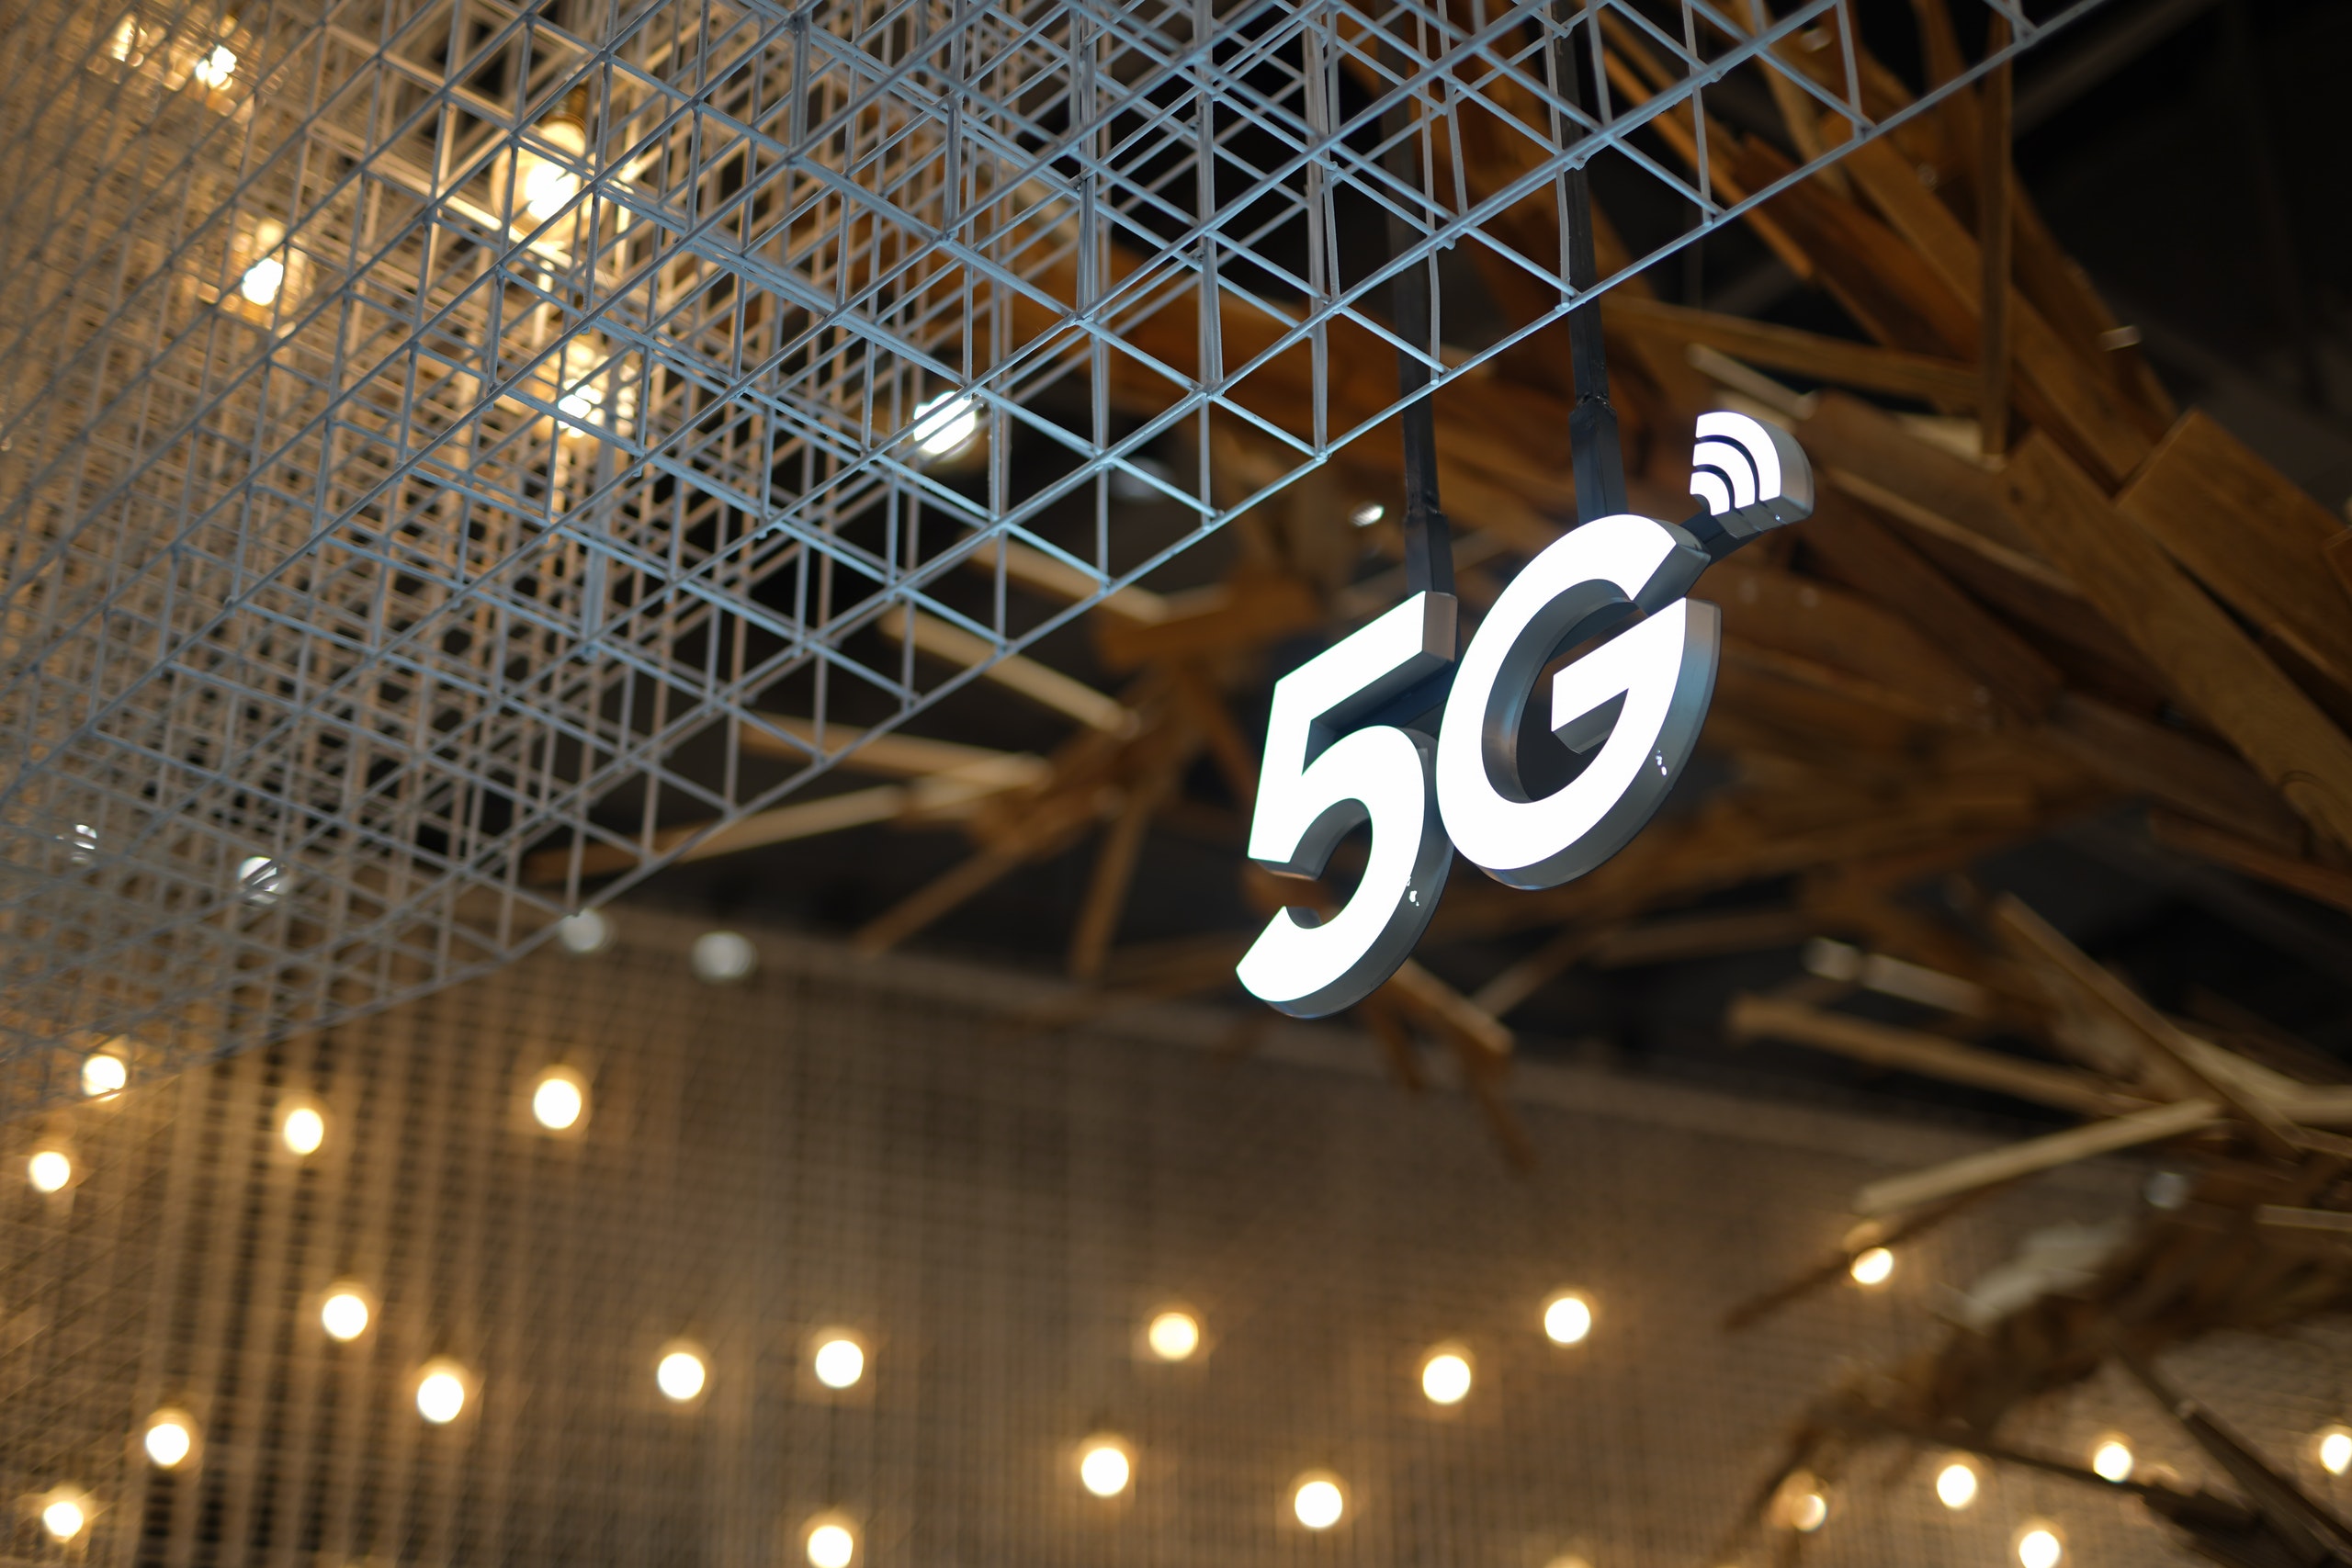 Could the emergence of 5G supercharge your digital marketing